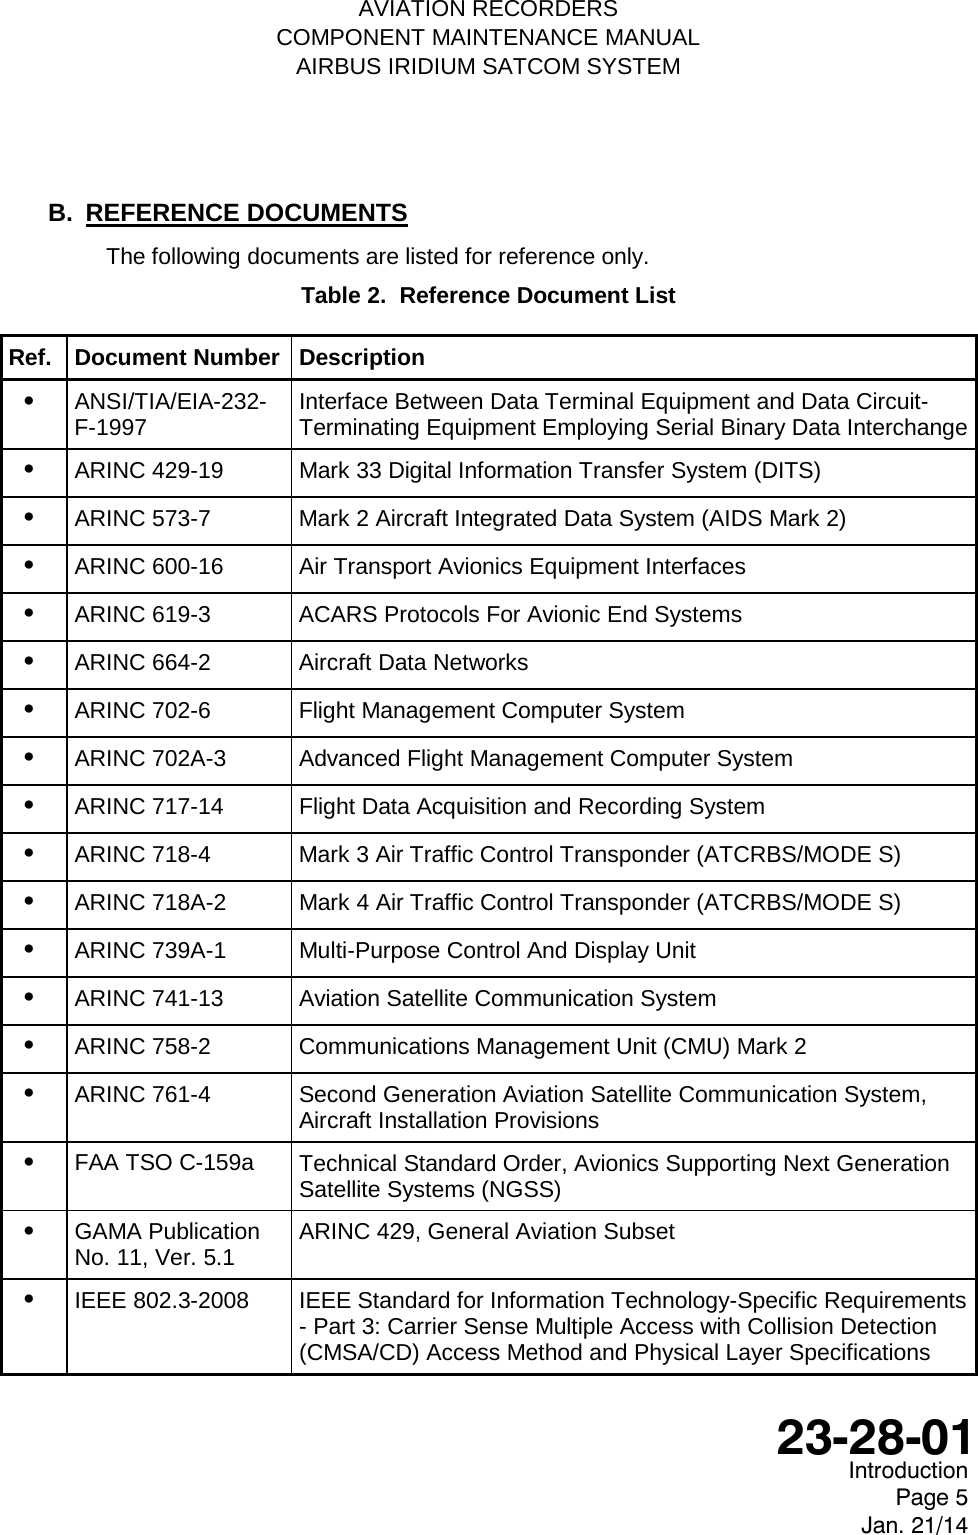   AVIATION RECORDERS COMPONENT MAINTENANCE MANUAL AIRBUS IRIDIUM SATCOM SYSTEM B. REFERENCE DOCUMENTS The following documents are listed for reference only. Table 2.  Reference Document List Ref. Document Number Description •   ANSI/TIA/EIA-232-F-1997 Interface Between Data Terminal Equipment and Data Circuit-Terminating Equipment Employing Serial Binary Data Interchange •   ARINC 429-19 Mark 33 Digital Information Transfer System (DITS) •   ARINC 573-7  Mark 2 Aircraft Integrated Data System (AIDS Mark 2) •   ARINC 600-16 Air Transport Avionics Equipment Interfaces •   ARINC 619-3  ACARS Protocols For Avionic End Systems •   ARINC 664-2  Aircraft Data Networks •   ARINC 702-6  Flight Management Computer System •   ARINC 702A-3  Advanced Flight Management Computer System •   ARINC 717-14 Flight Data Acquisition and Recording System •   ARINC 718-4  Mark 3 Air Traffic Control Transponder (ATCRBS/MODE S) •   ARINC 718A-2  Mark 4 Air Traffic Control Transponder (ATCRBS/MODE S) •   ARINC 739A-1  Multi-Purpose Control And Display Unit •   ARINC 741-13 Aviation Satellite Communication System •   ARINC 758-2  Communications Management Unit (CMU) Mark 2 •   ARINC 761-4  Second Generation Aviation Satellite Communication System, Aircraft Installation Provisions •   FAA TSO C-159a Technical Standard Order, Avionics Supporting Next Generation Satellite Systems (NGSS) •   GAMA Publication No. 11, Ver. 5.1 ARINC 429, General Aviation Subset •   IEEE 802.3-2008 IEEE Standard for Information Technology-Specific Requirements - Part 3: Carrier Sense Multiple Access with Collision Detection (CMSA/CD) Access Method and Physical Layer Specifications  Introduction Page 5 Jan. 21/14  23-28-01 